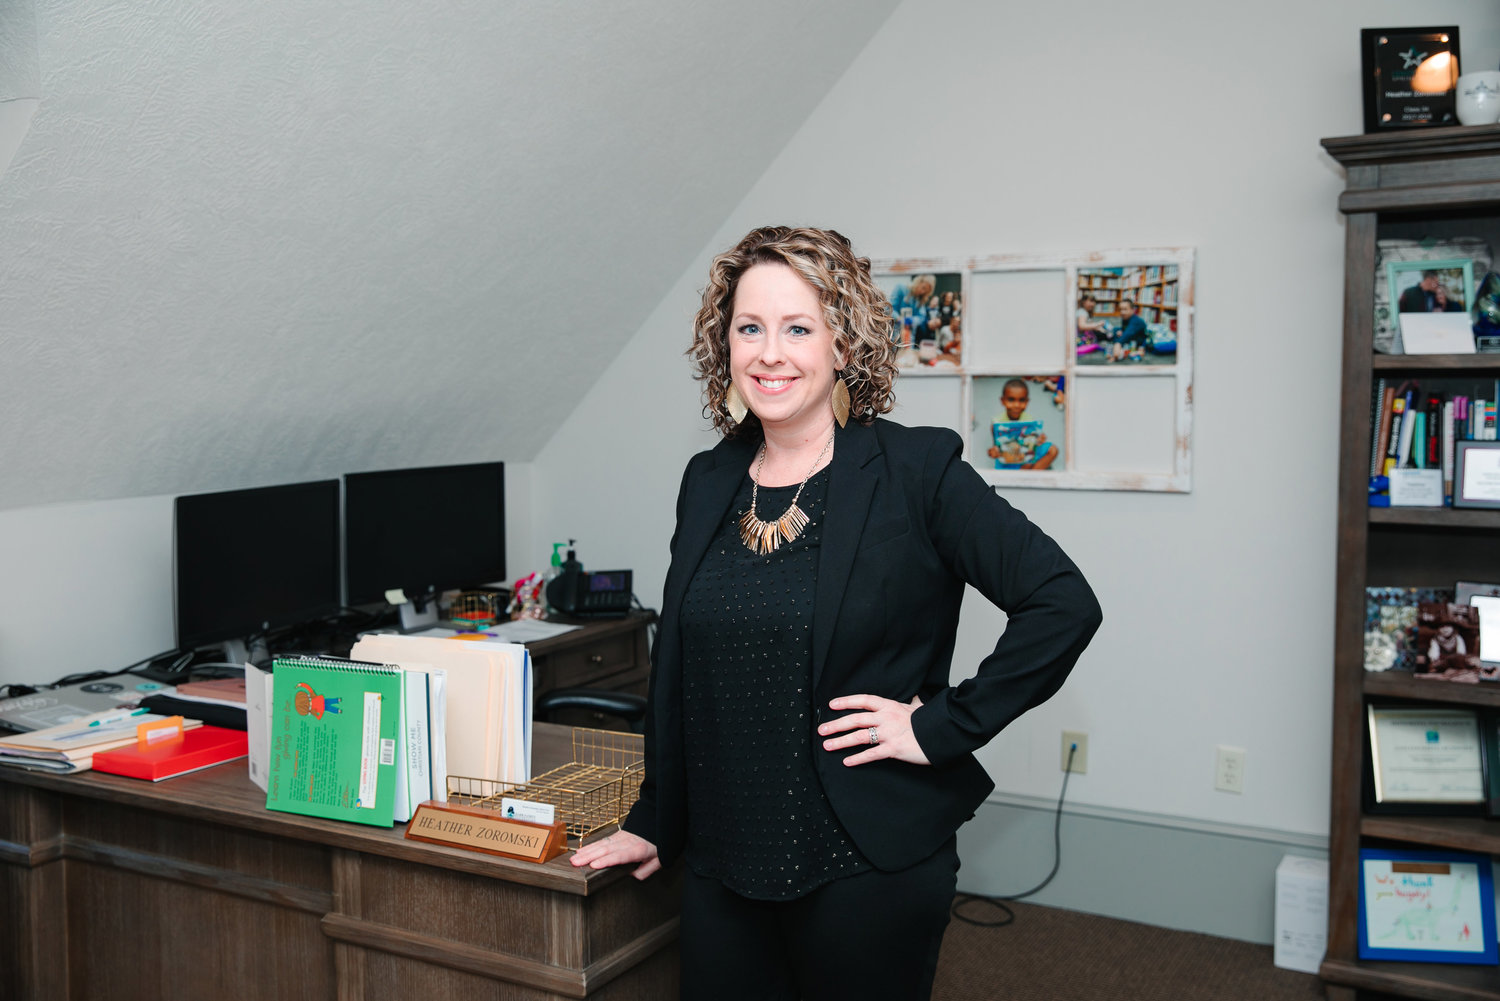 Since 2016, Heather Zoromski has led the Darr Family Foundation’s efforts to serve at-risk children through grant funding to local nonprofits.